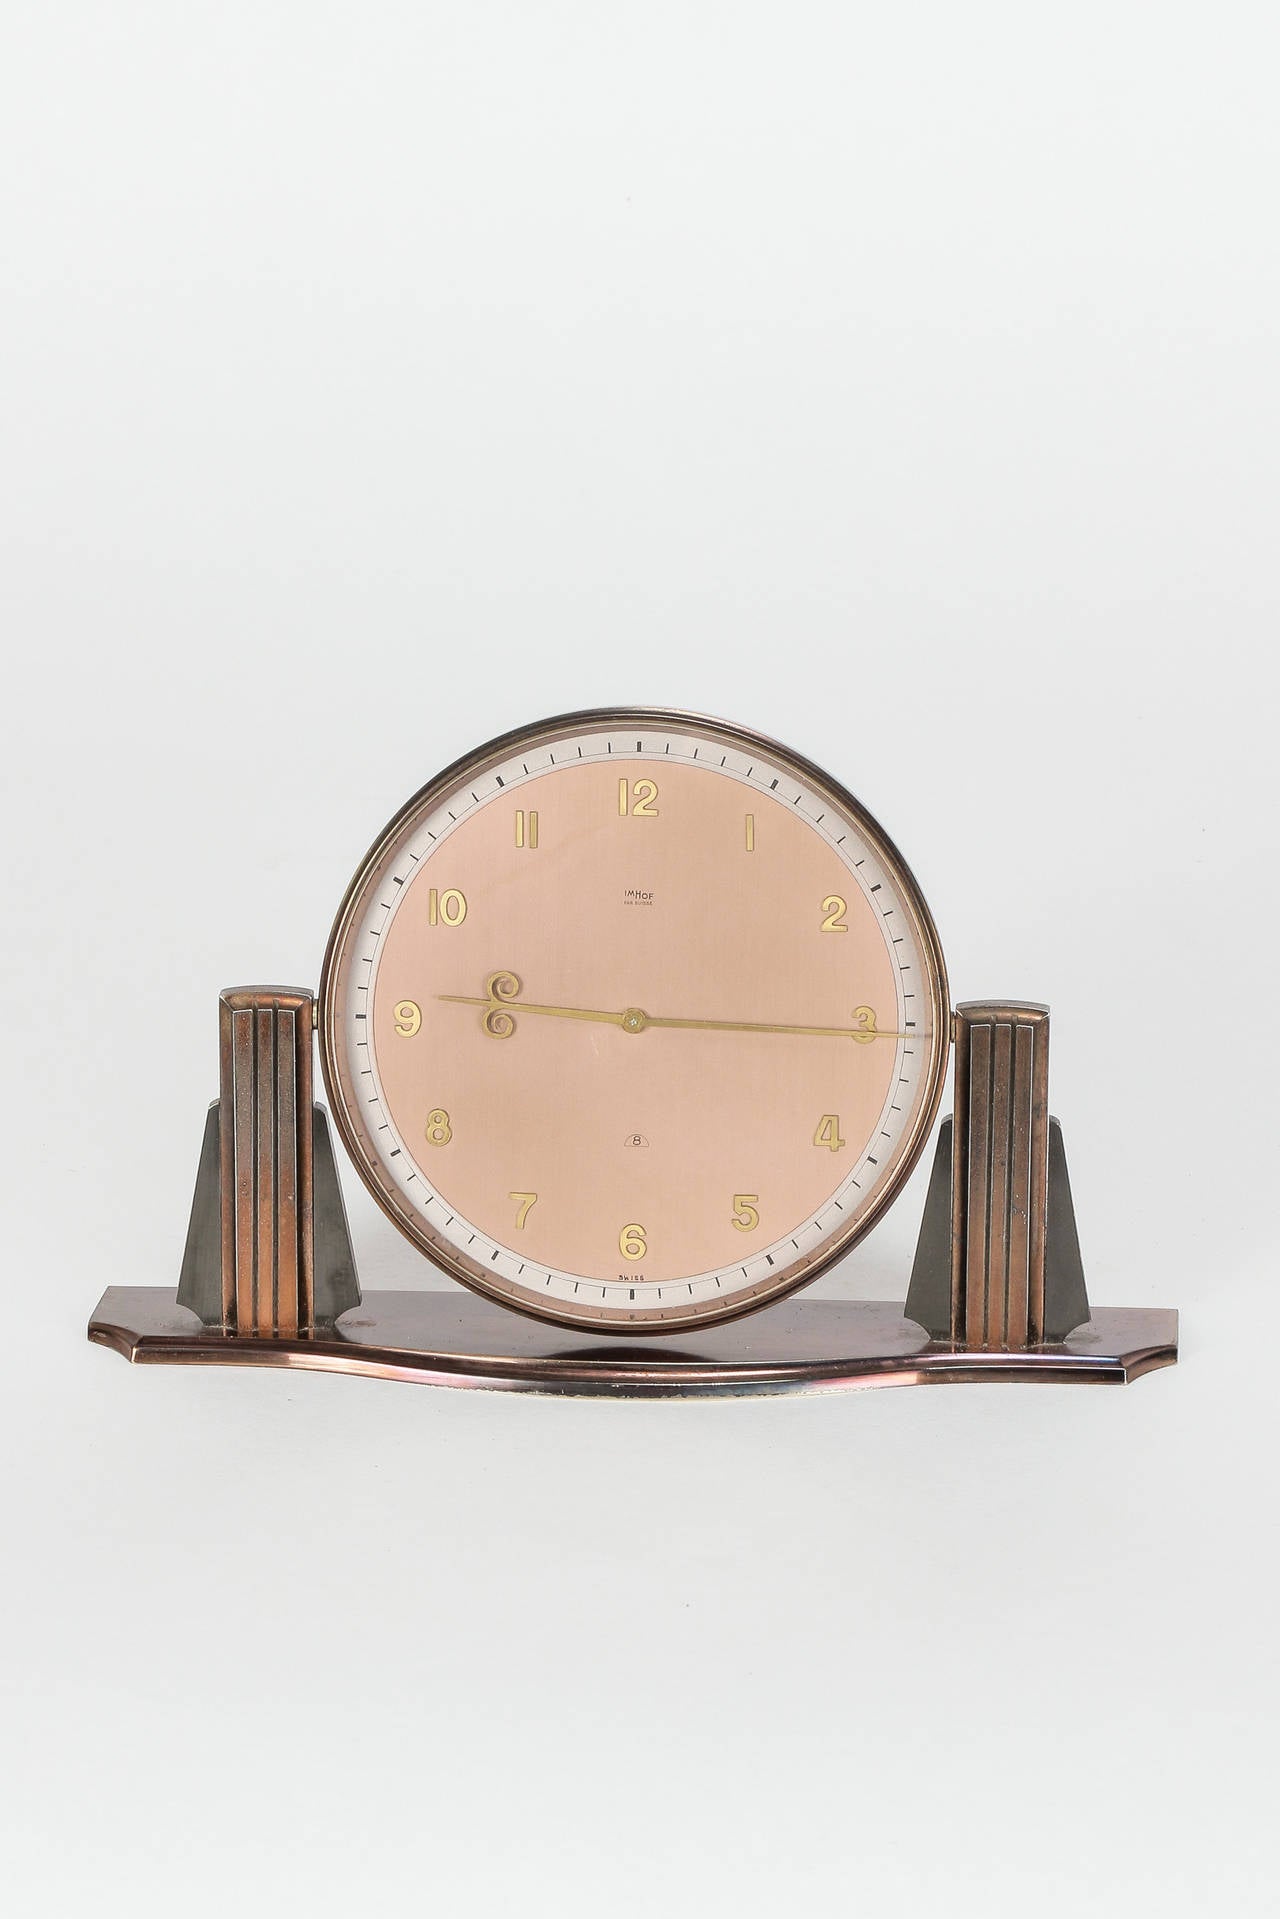 Swiss Art Deco table clock in copper by Arthur Imhof in the 1930's. The Imhof manufacture was established in 1924 and since then stands for quality, precision  and tradition. Every watch is a unique item, manufactured with passion for details. This